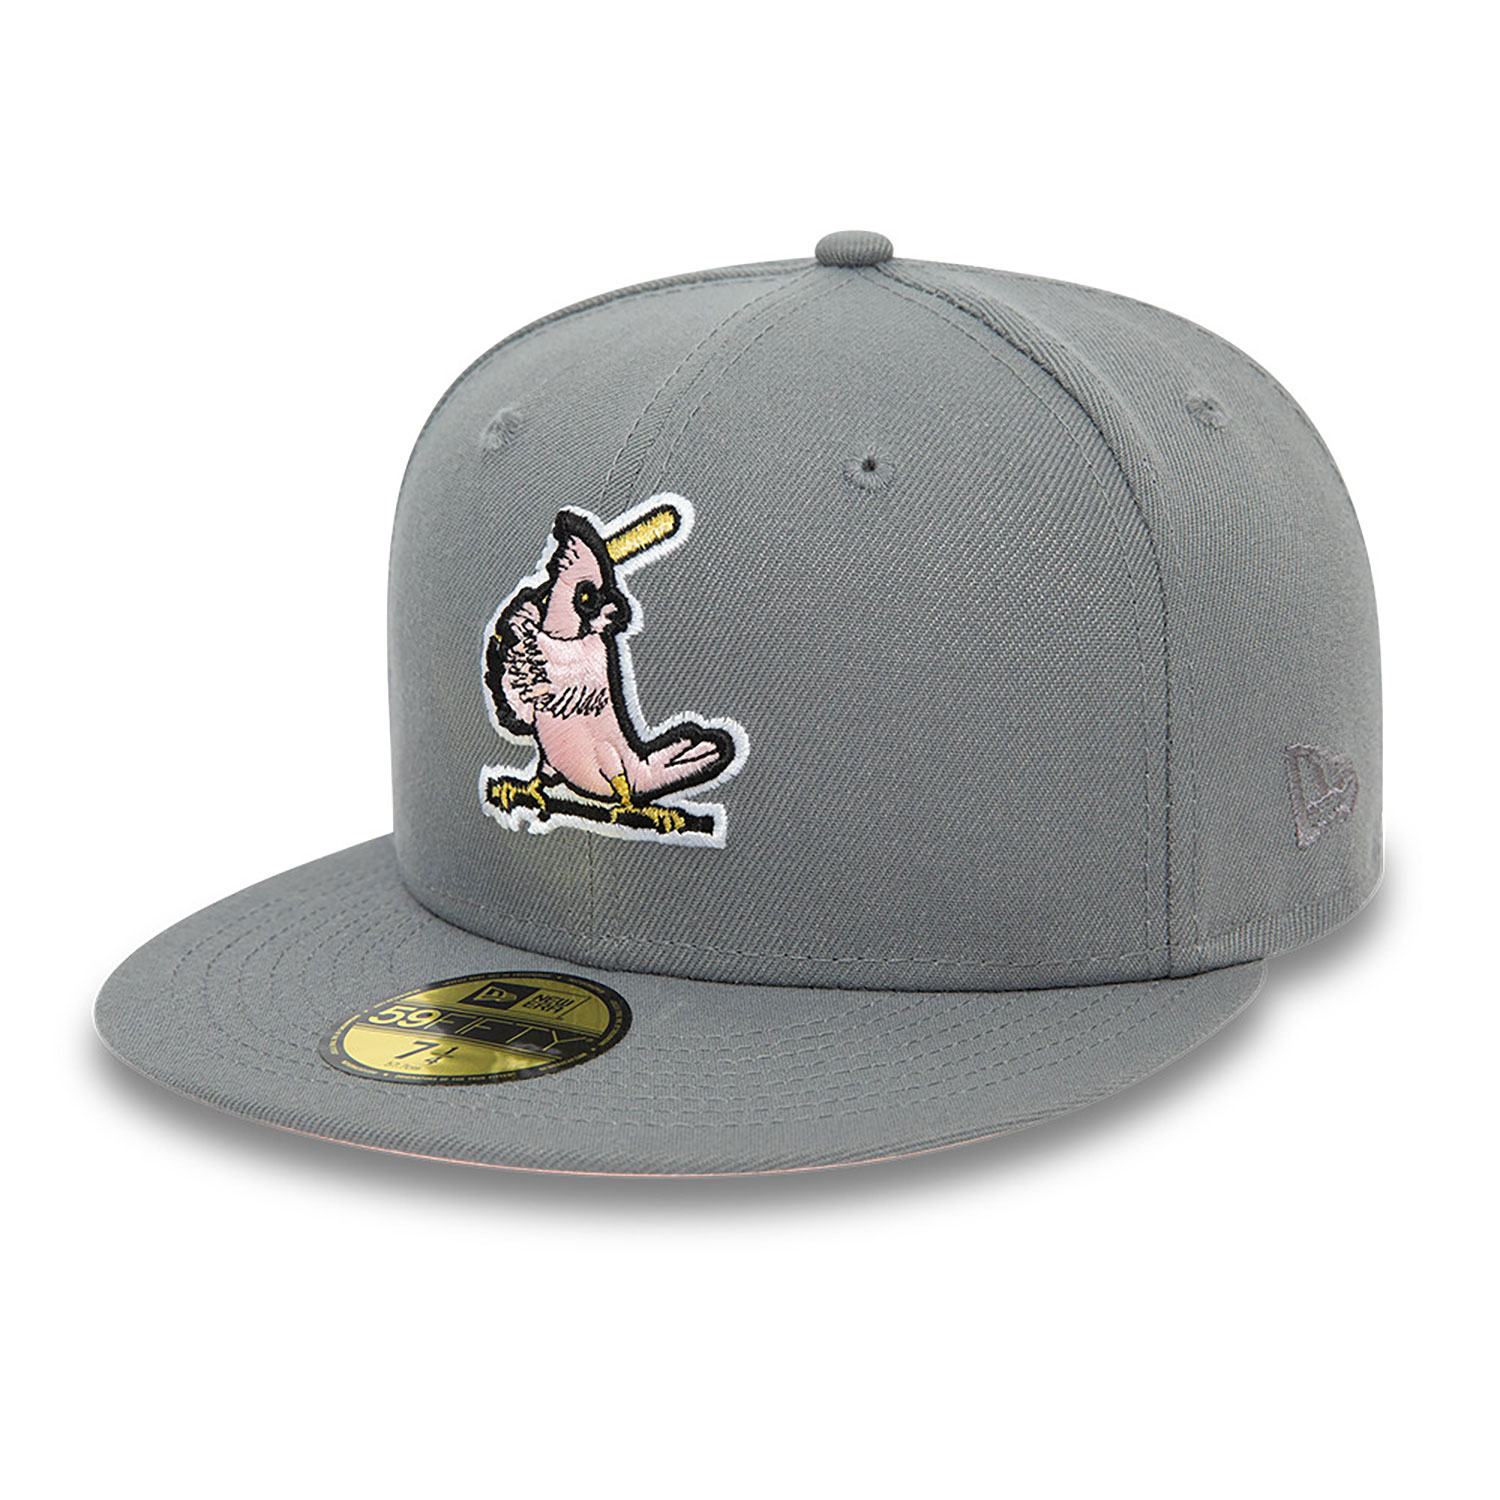 St. Louis Cardinals Chirps Me Up Grey 59FIFTY Fitted Cap